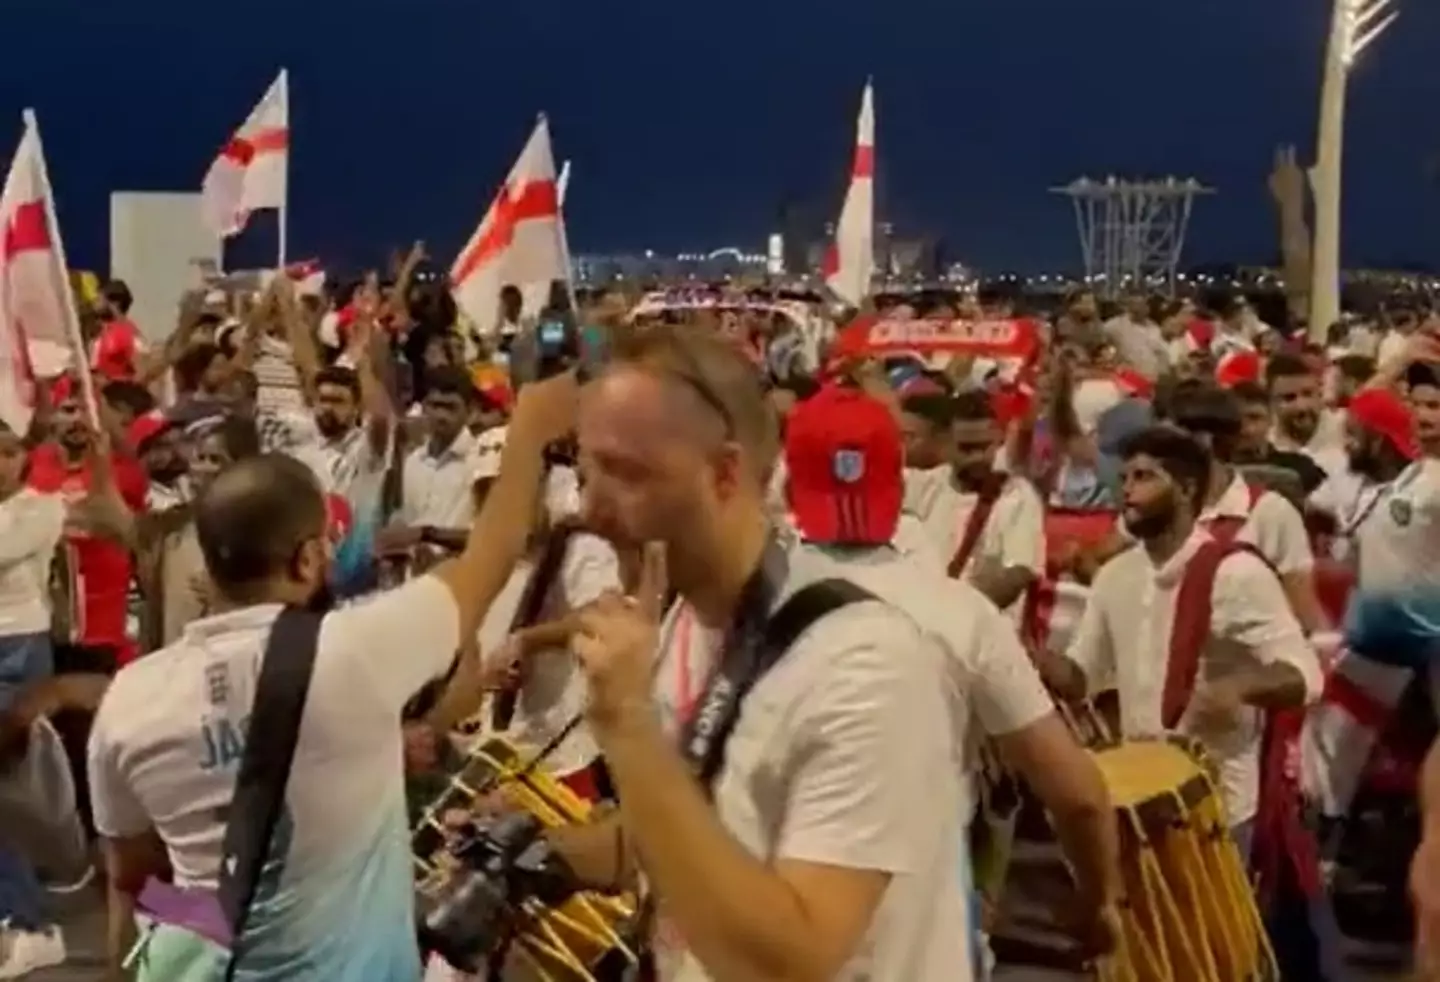 Footage of crowds of people in England shirts in Qatar has been mocked on social media.